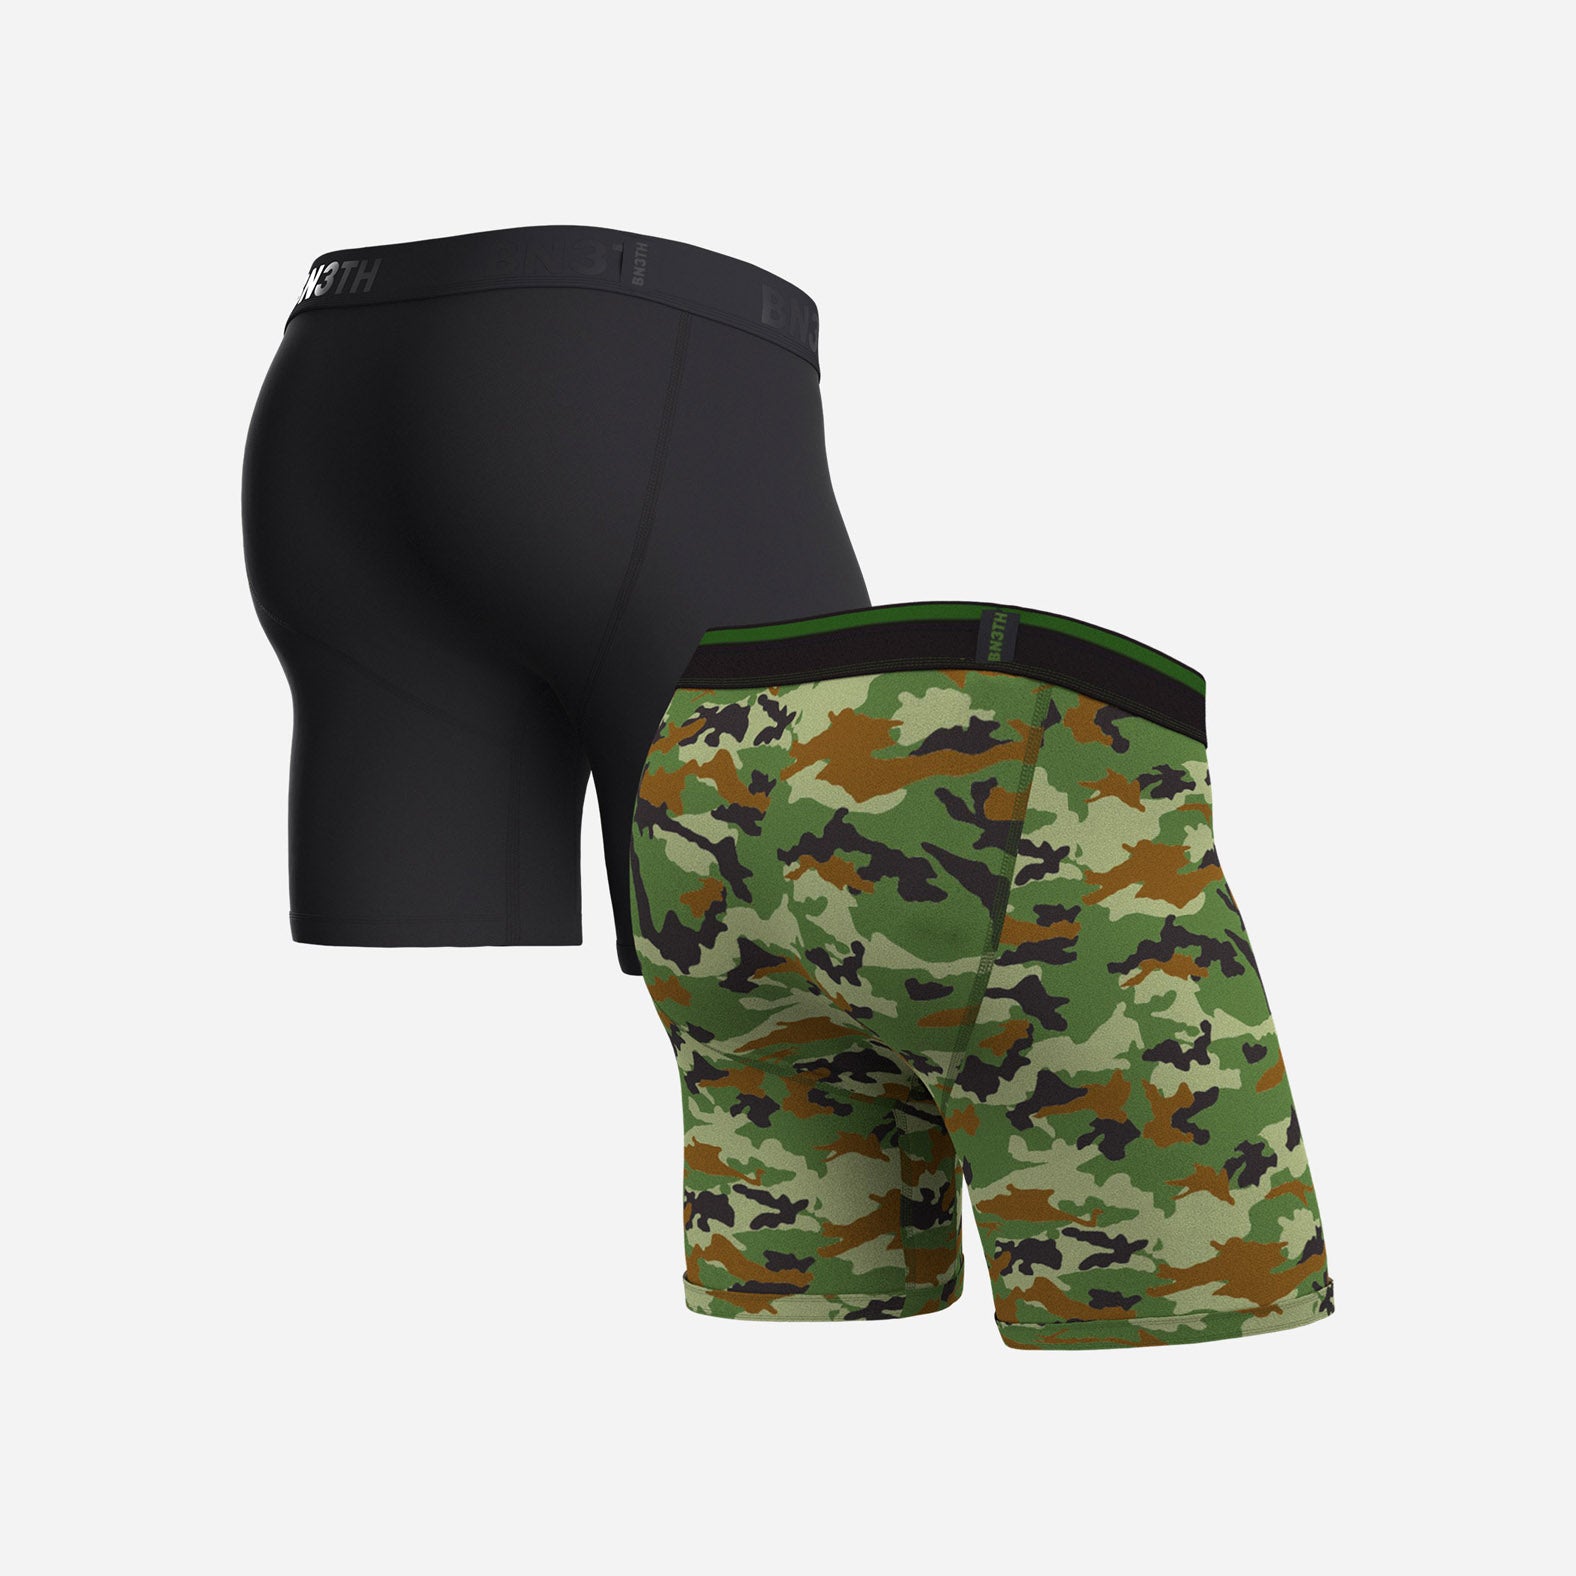 Classic Boxer Brief: Pine/Camo Green 2 Pack